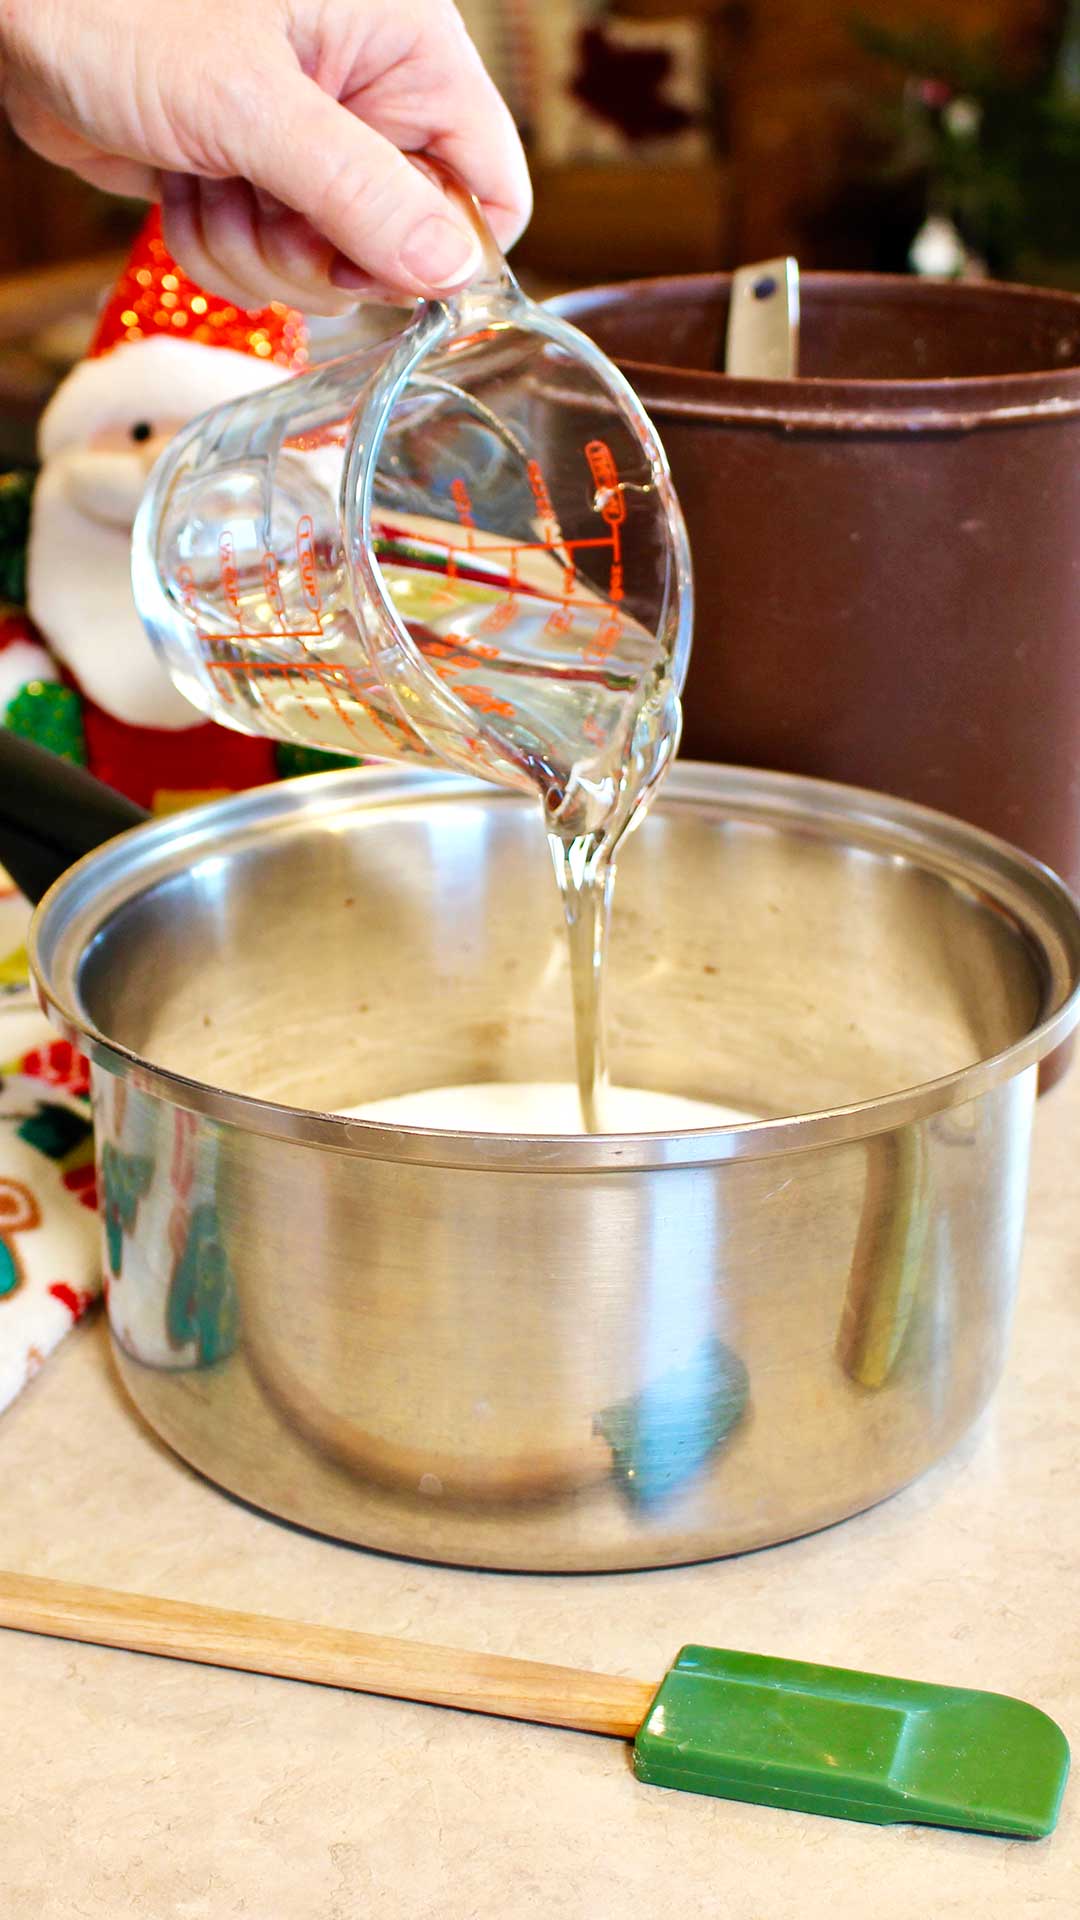 Hand pouring corn syrup into a pot of sugar on the counter top.